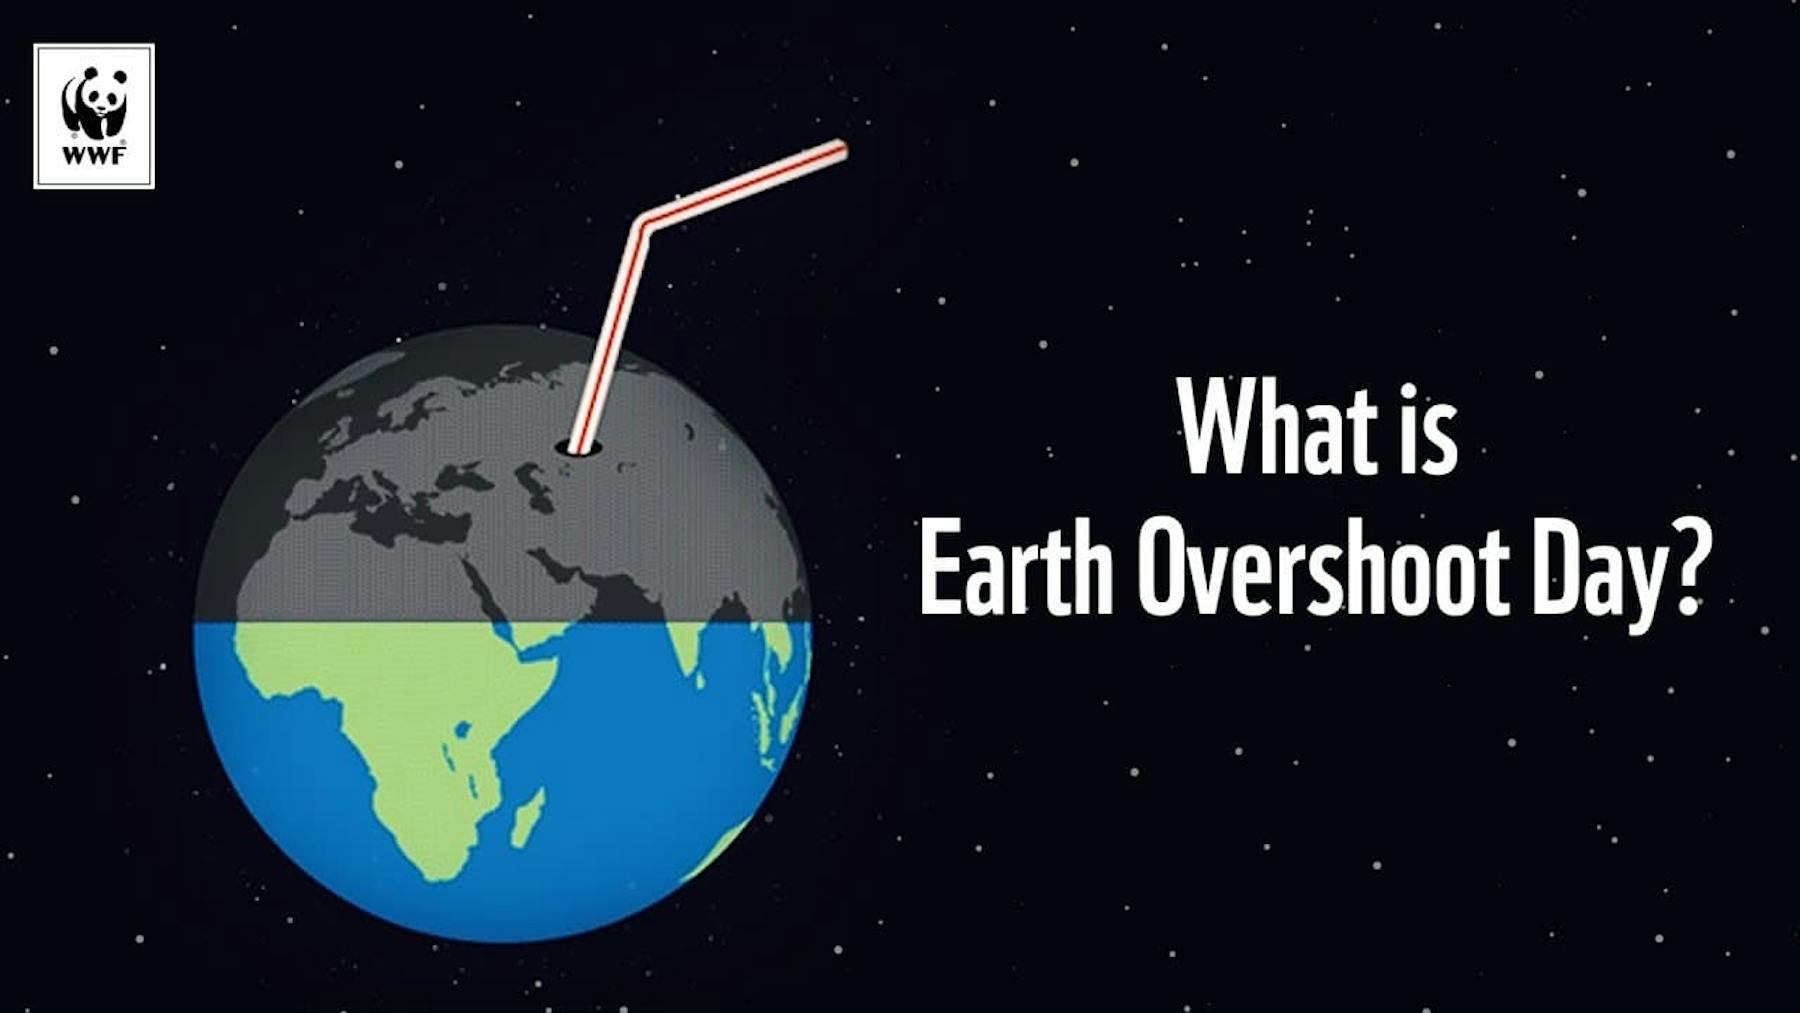 what is overshoot day? with earth and straw in the earth against black starry sky